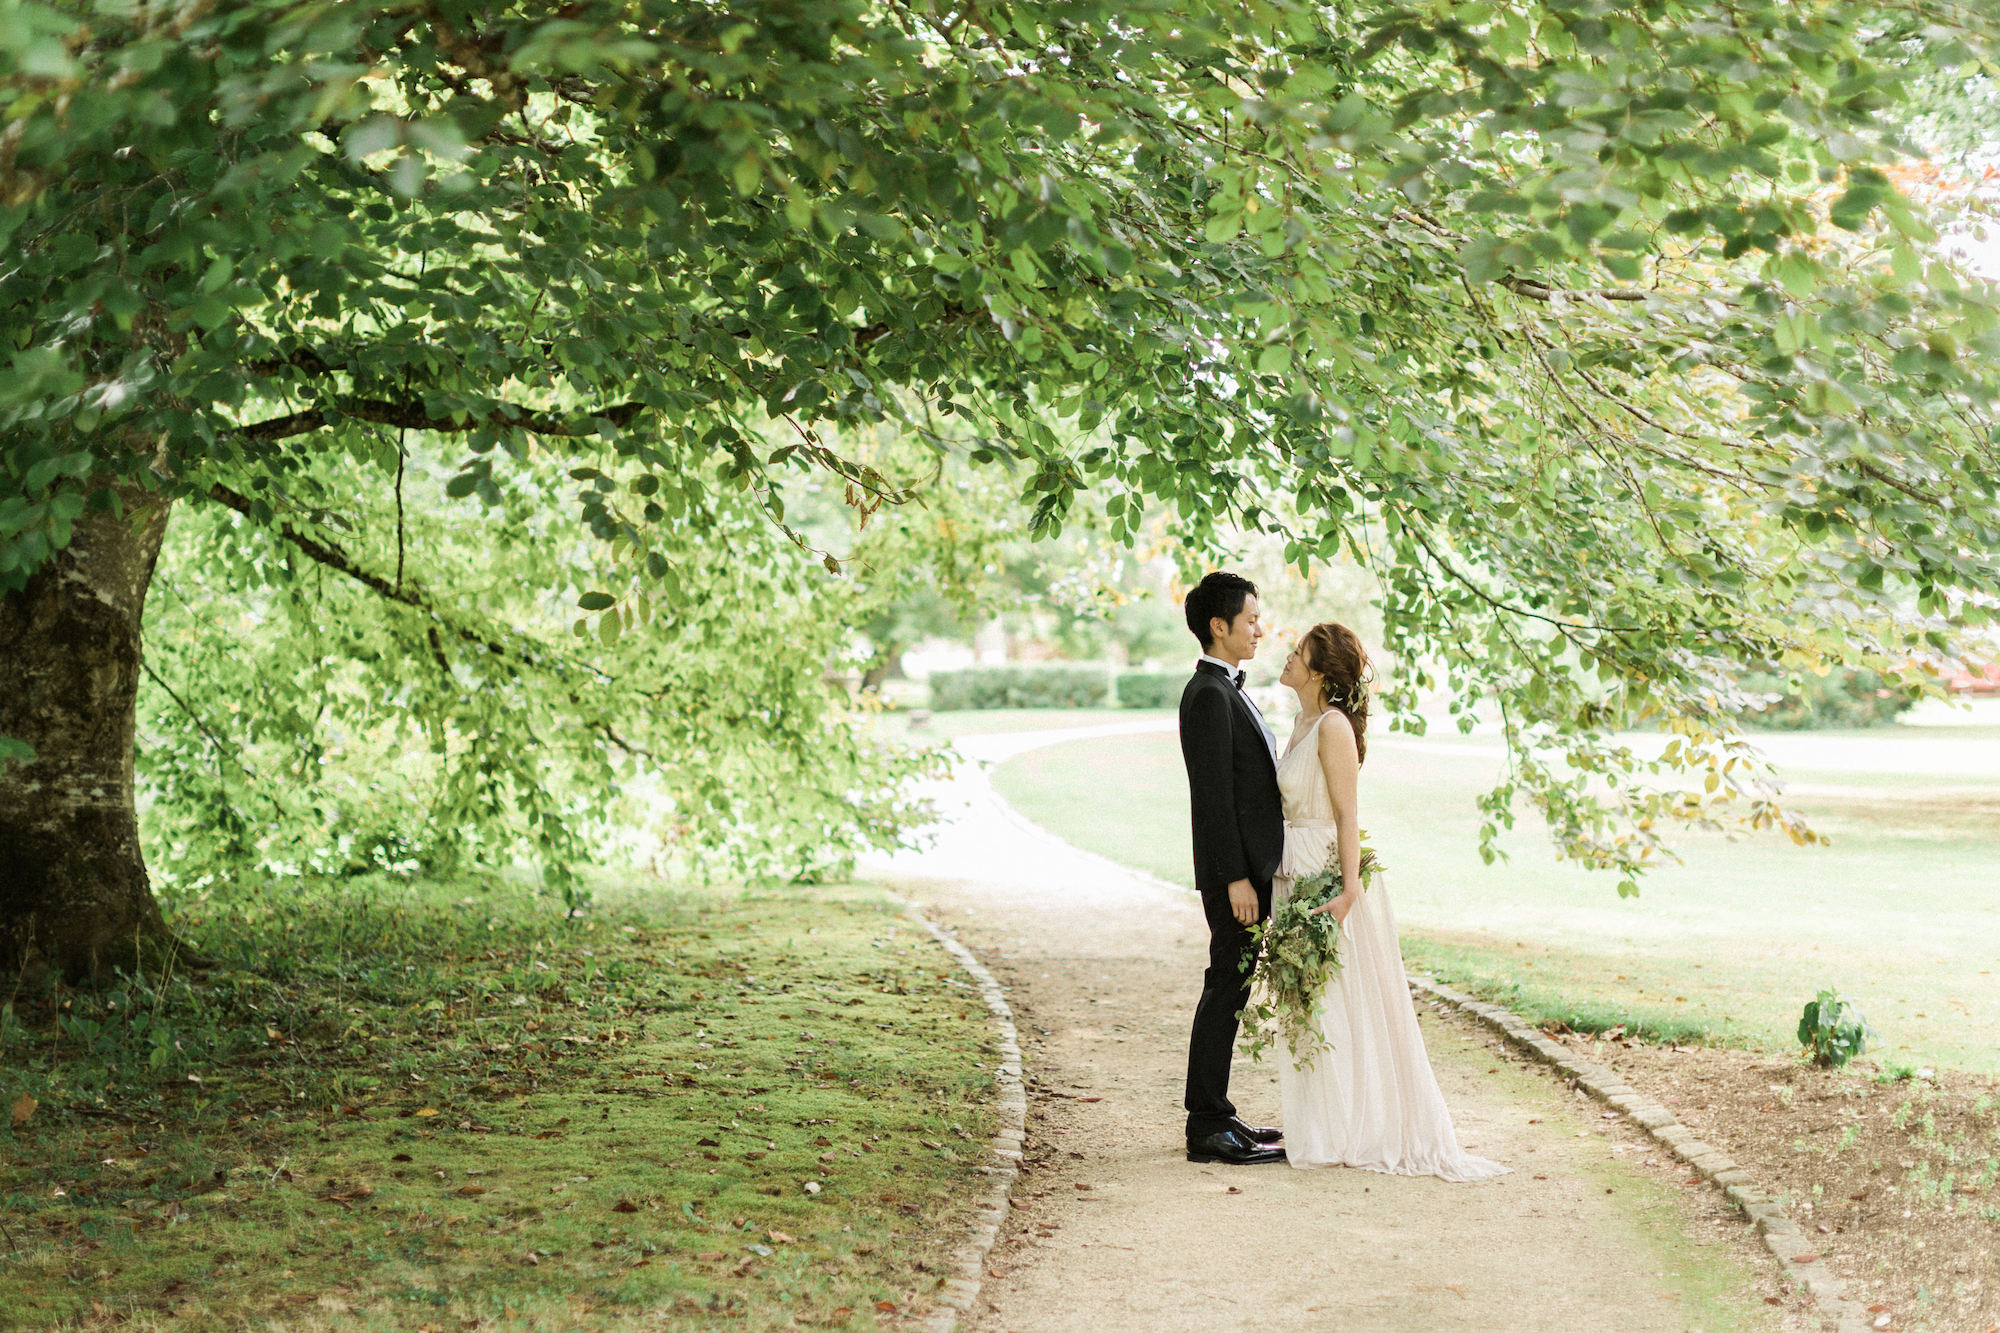 Natural & Romantic wedding in France